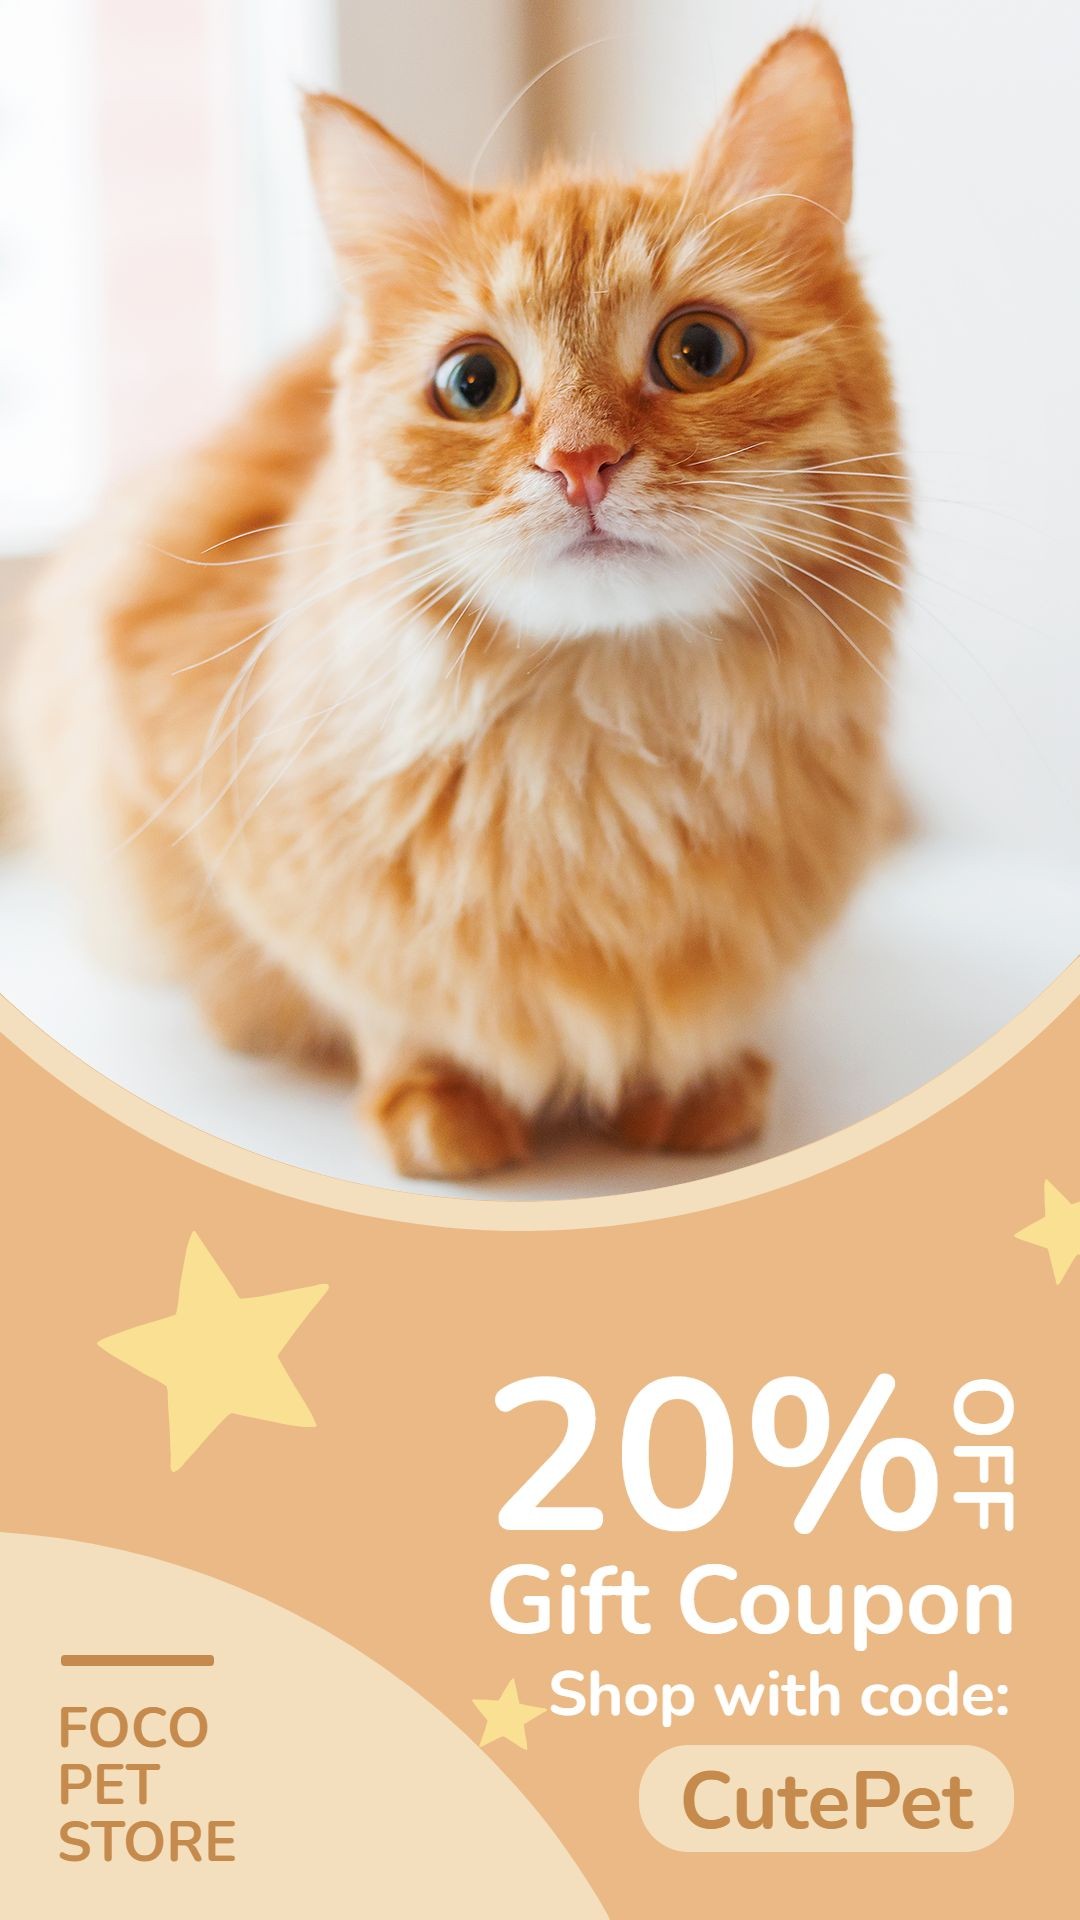 Star Element Simple Style Pet Product Supplies Sale Promo Ecommerce Story预览效果